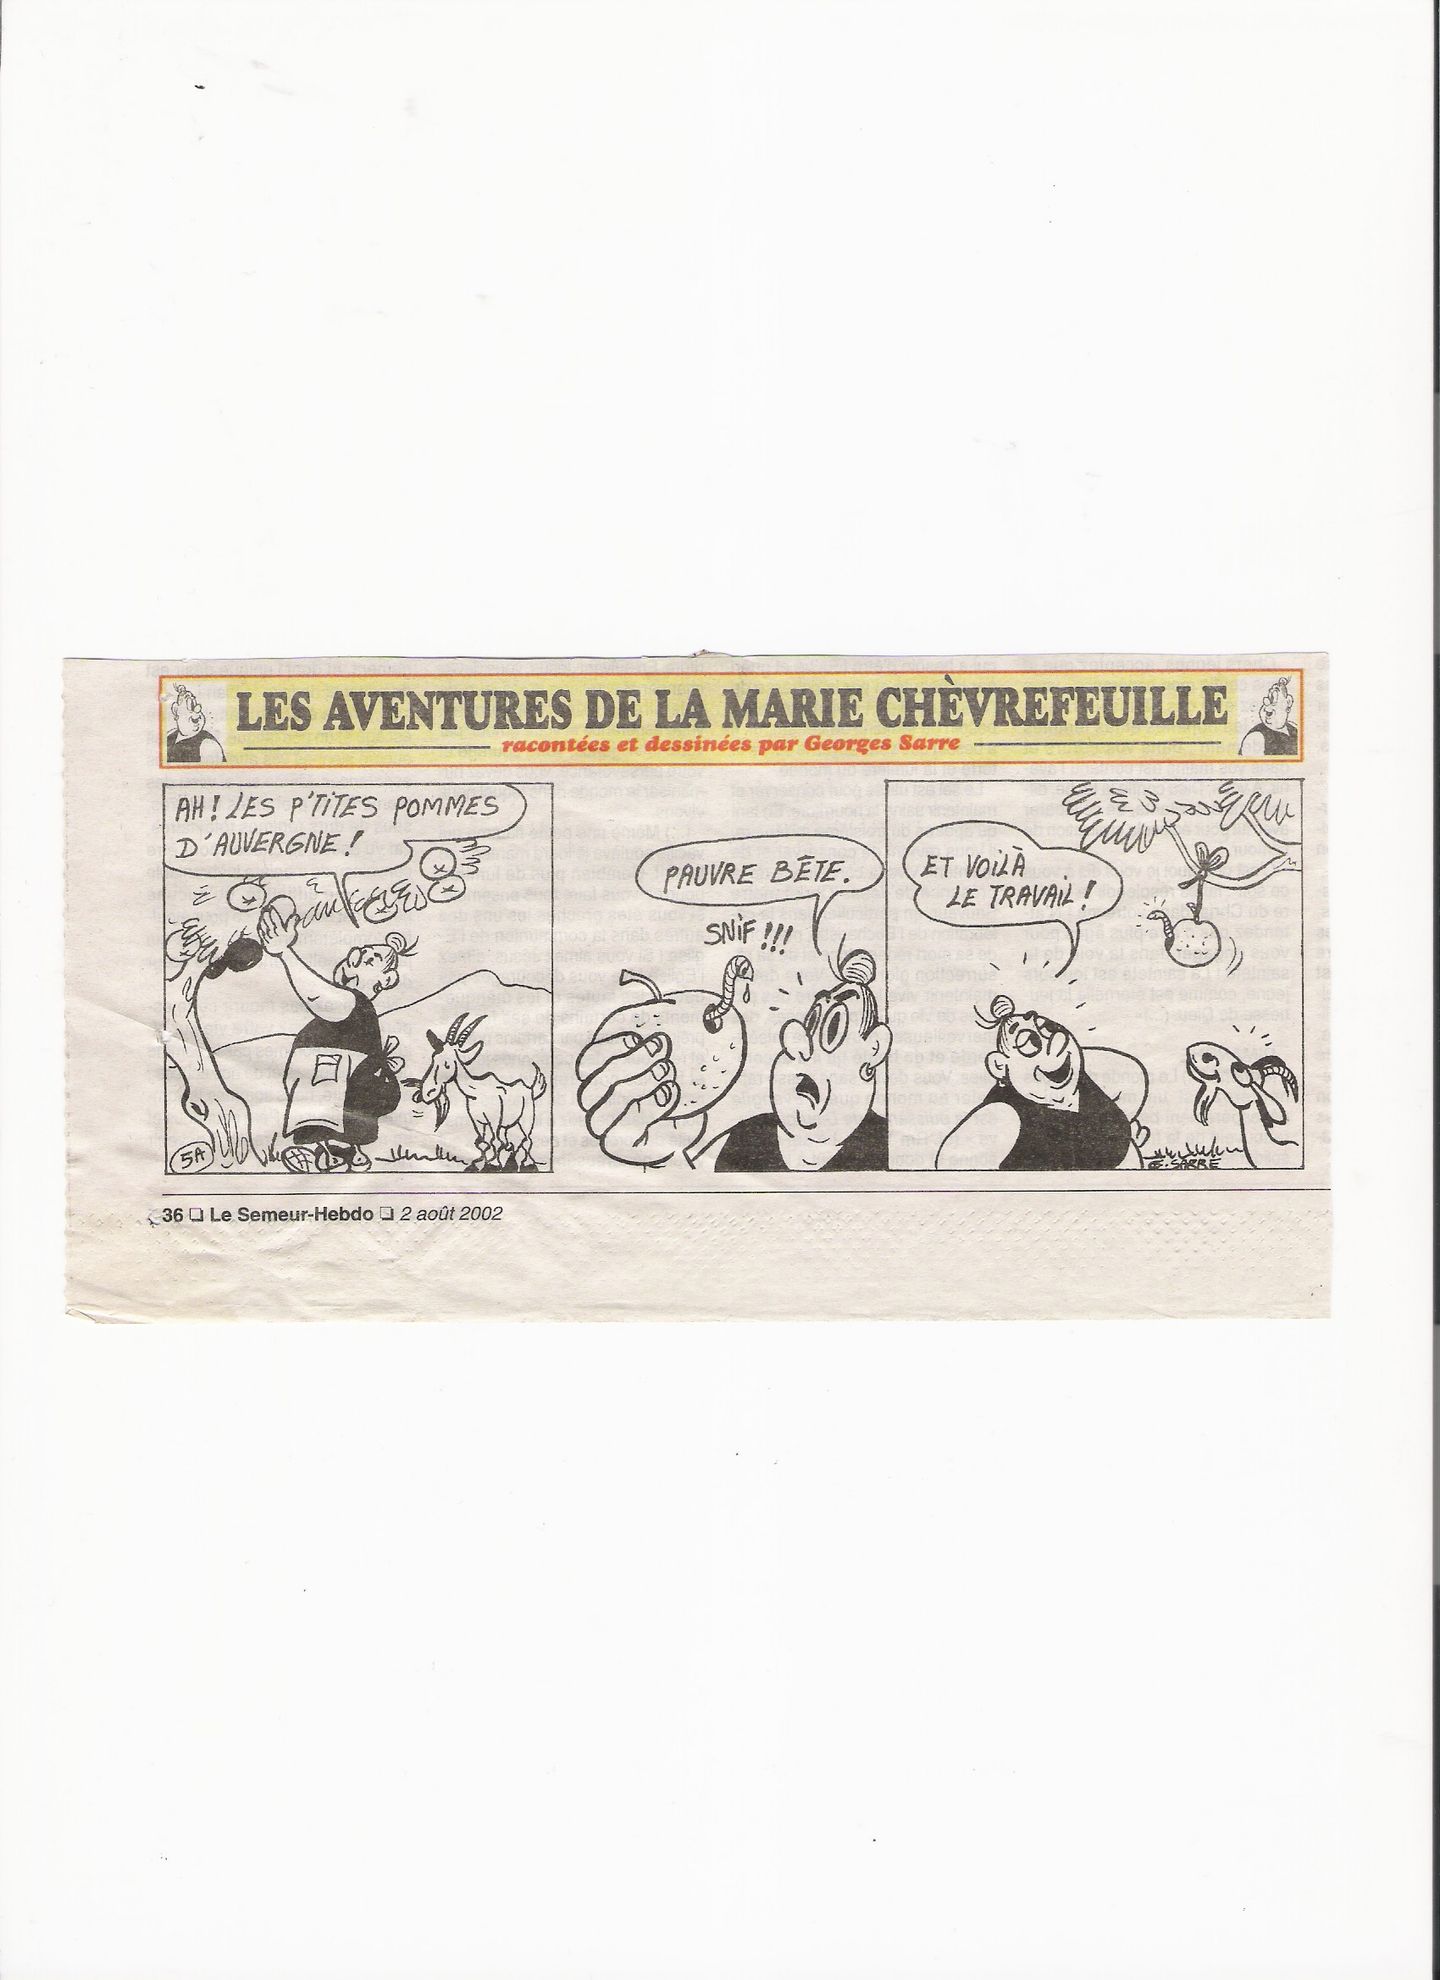 Marie chevrefeuille 2